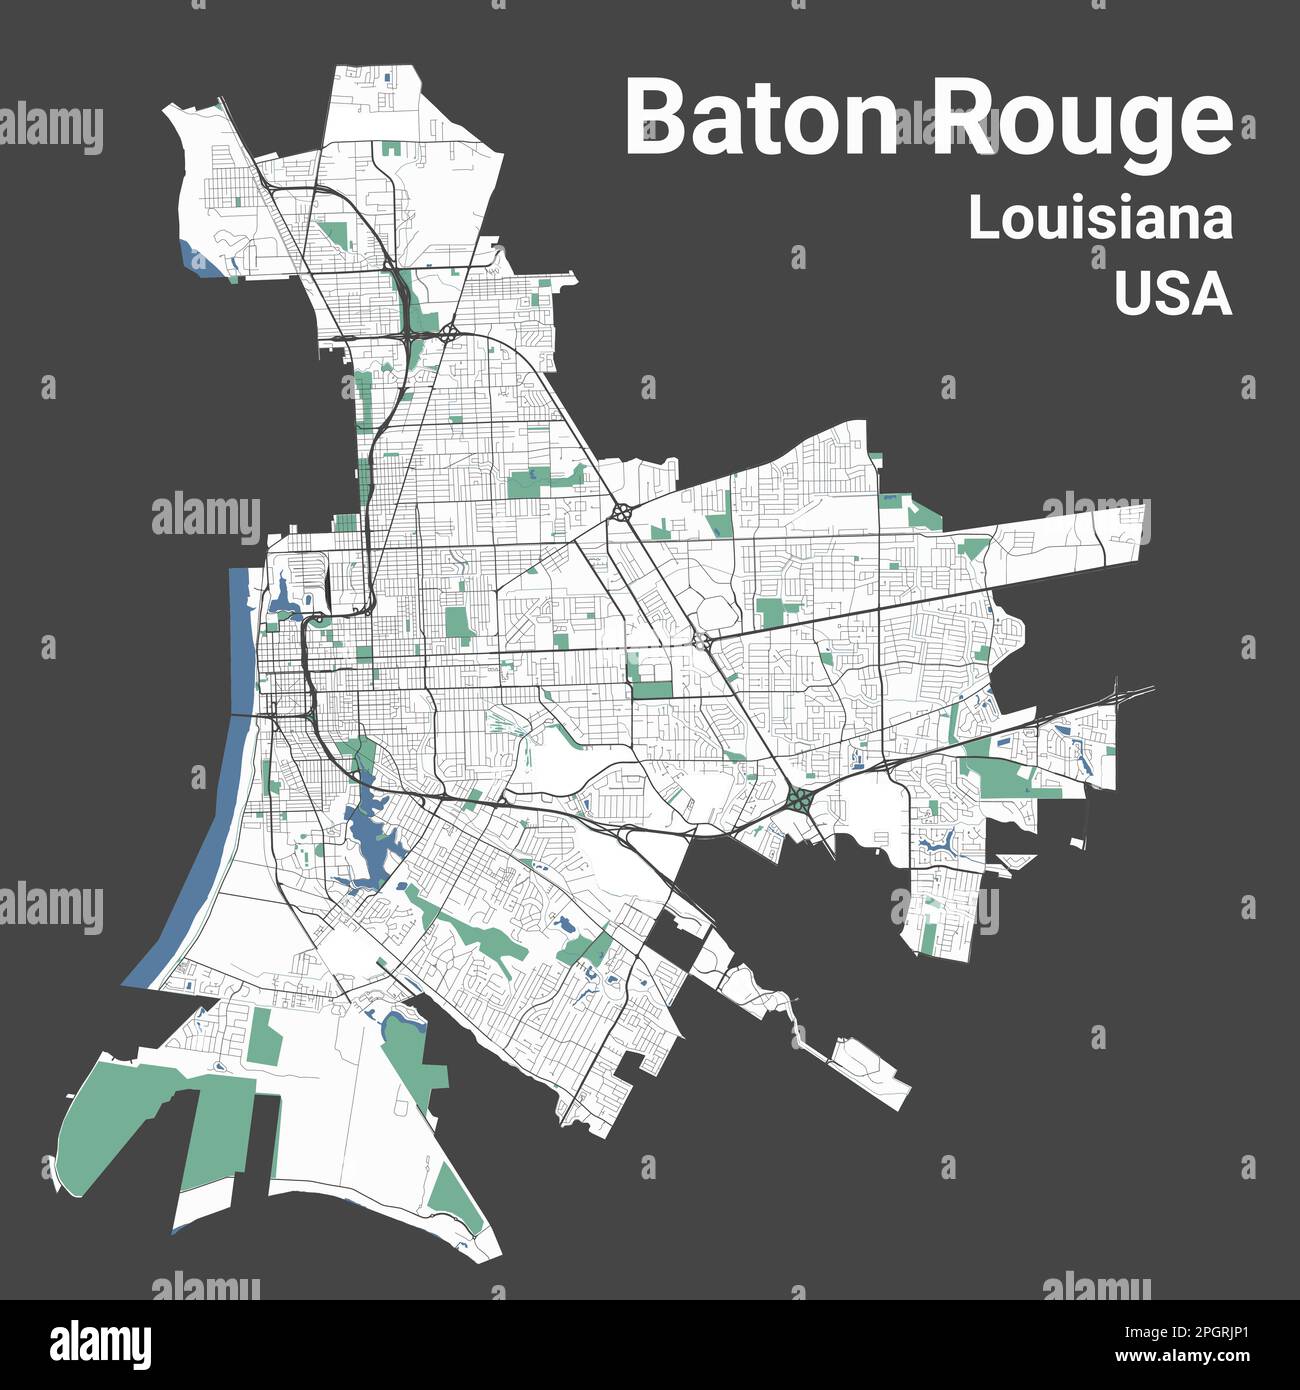 The map shows the geographic regions of Louisiana. In which region is the  city of Baton Rouge located? 